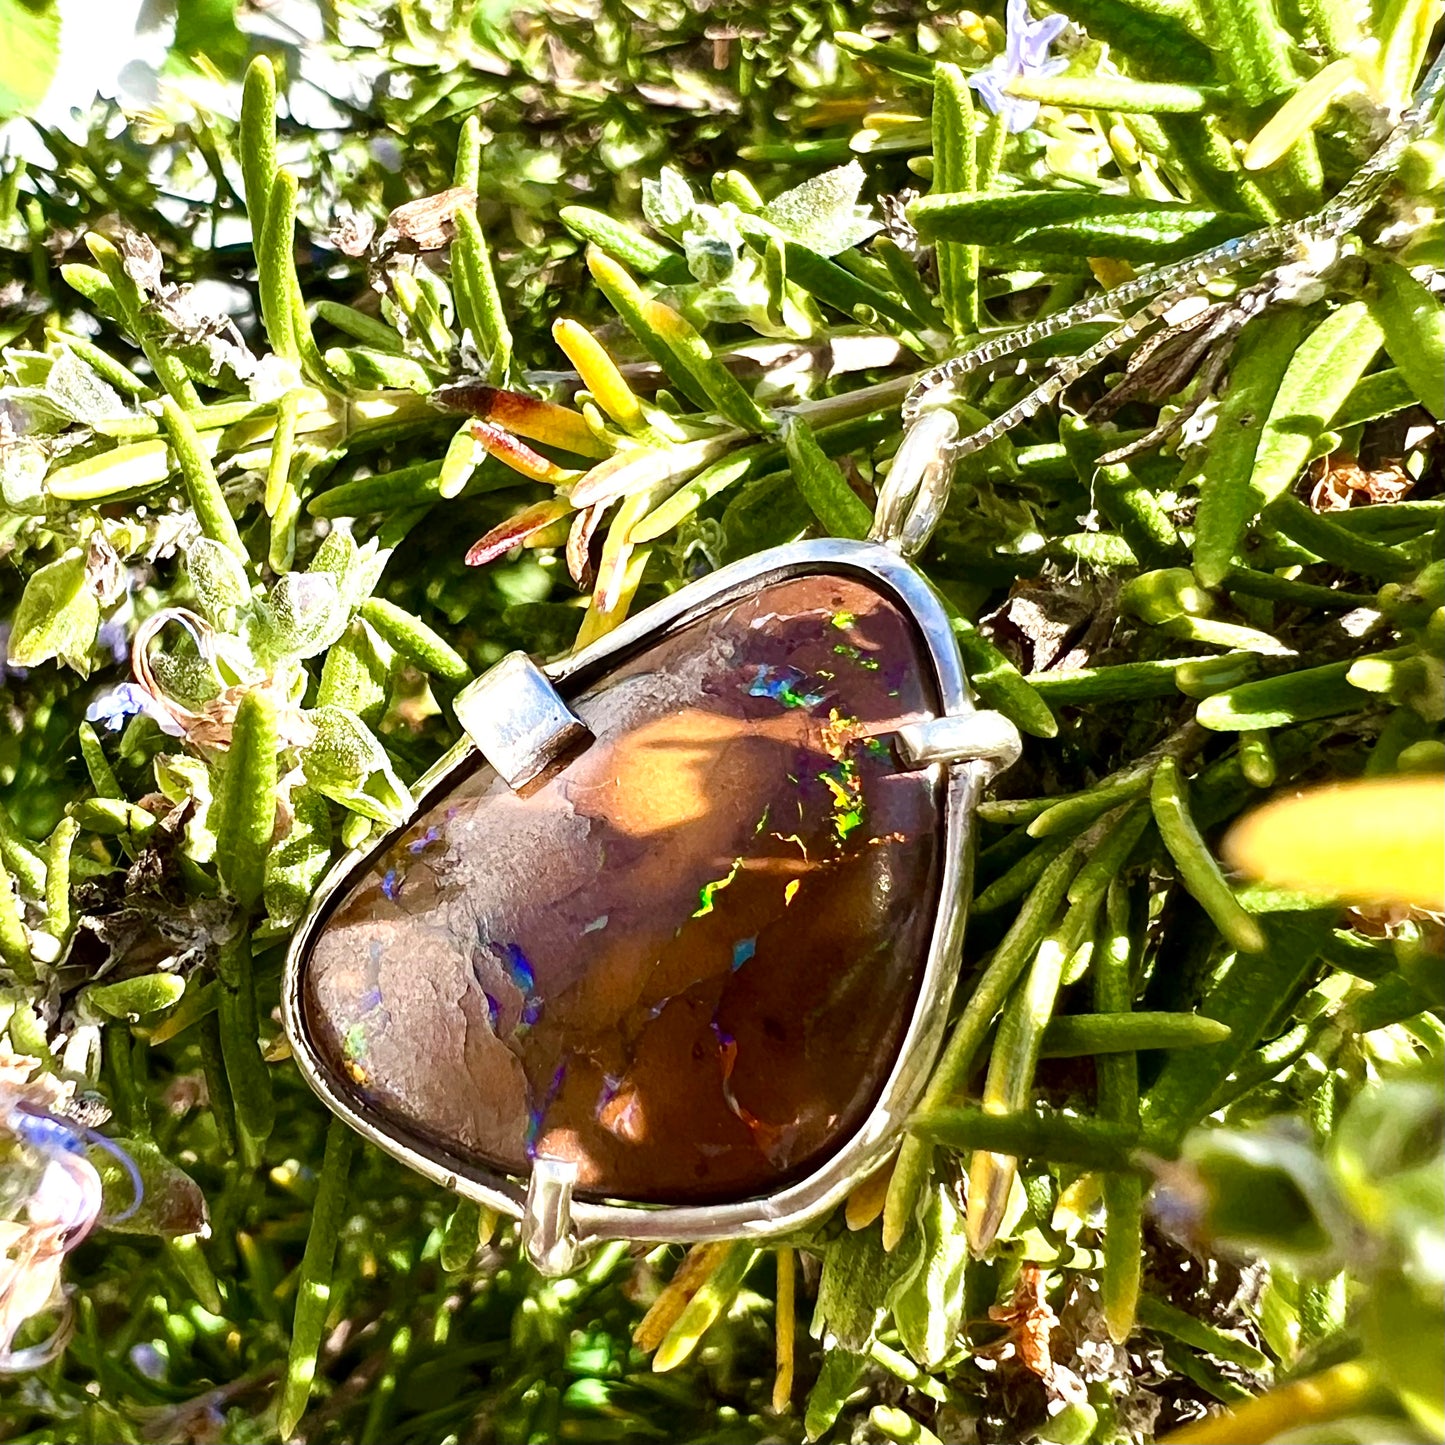 A handmade sterling silver pendant bezel and prong set with a natural boulder opal stone.  The opal shines veins of color.